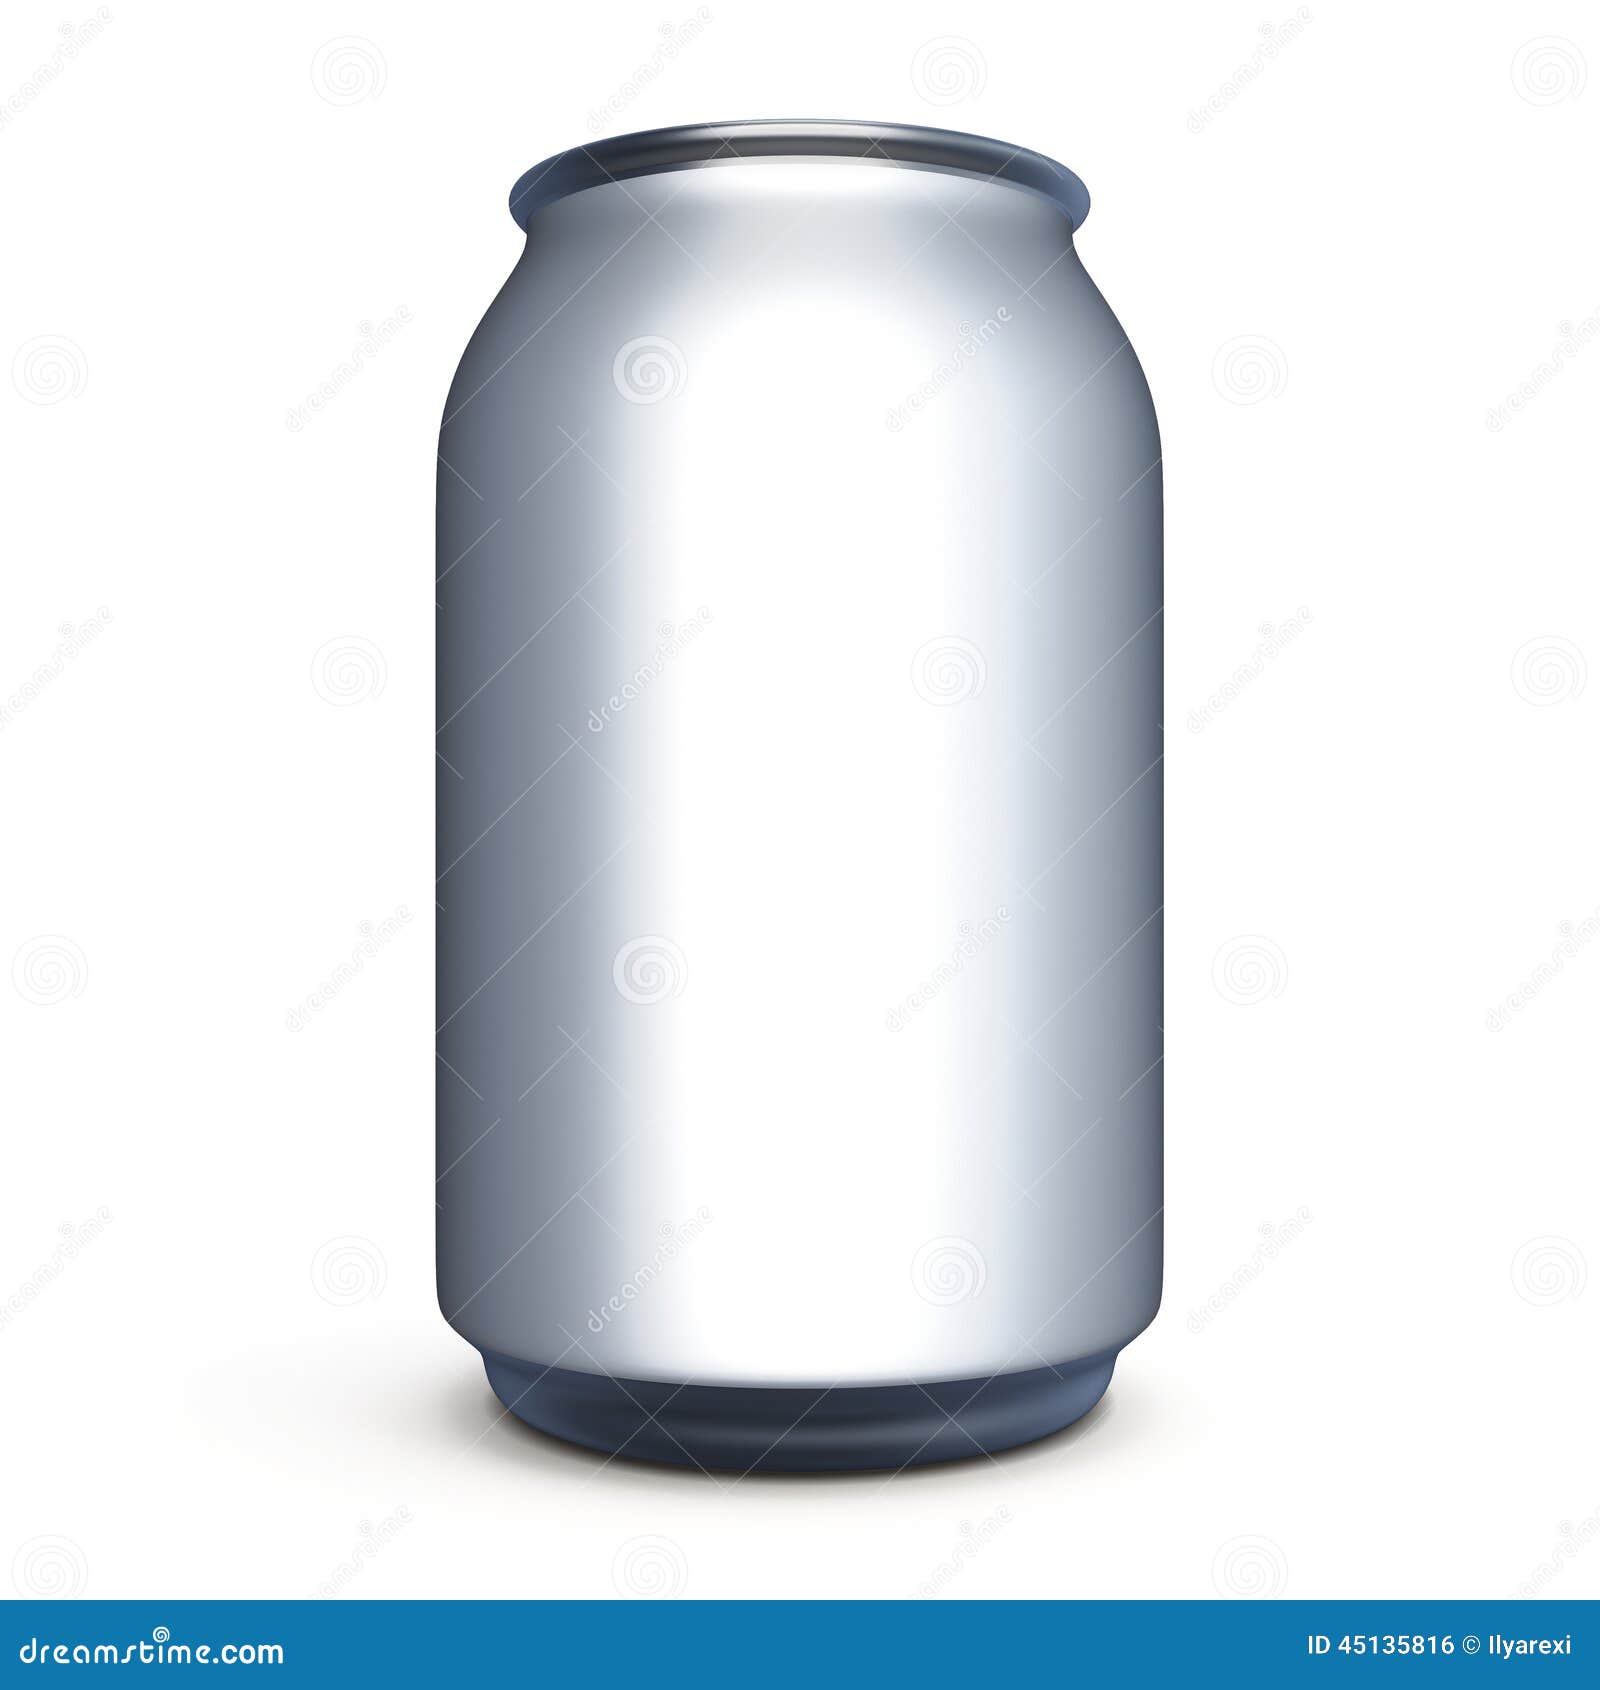 Bank For Beer, Soda Without Label For Design. Stock Photo ...